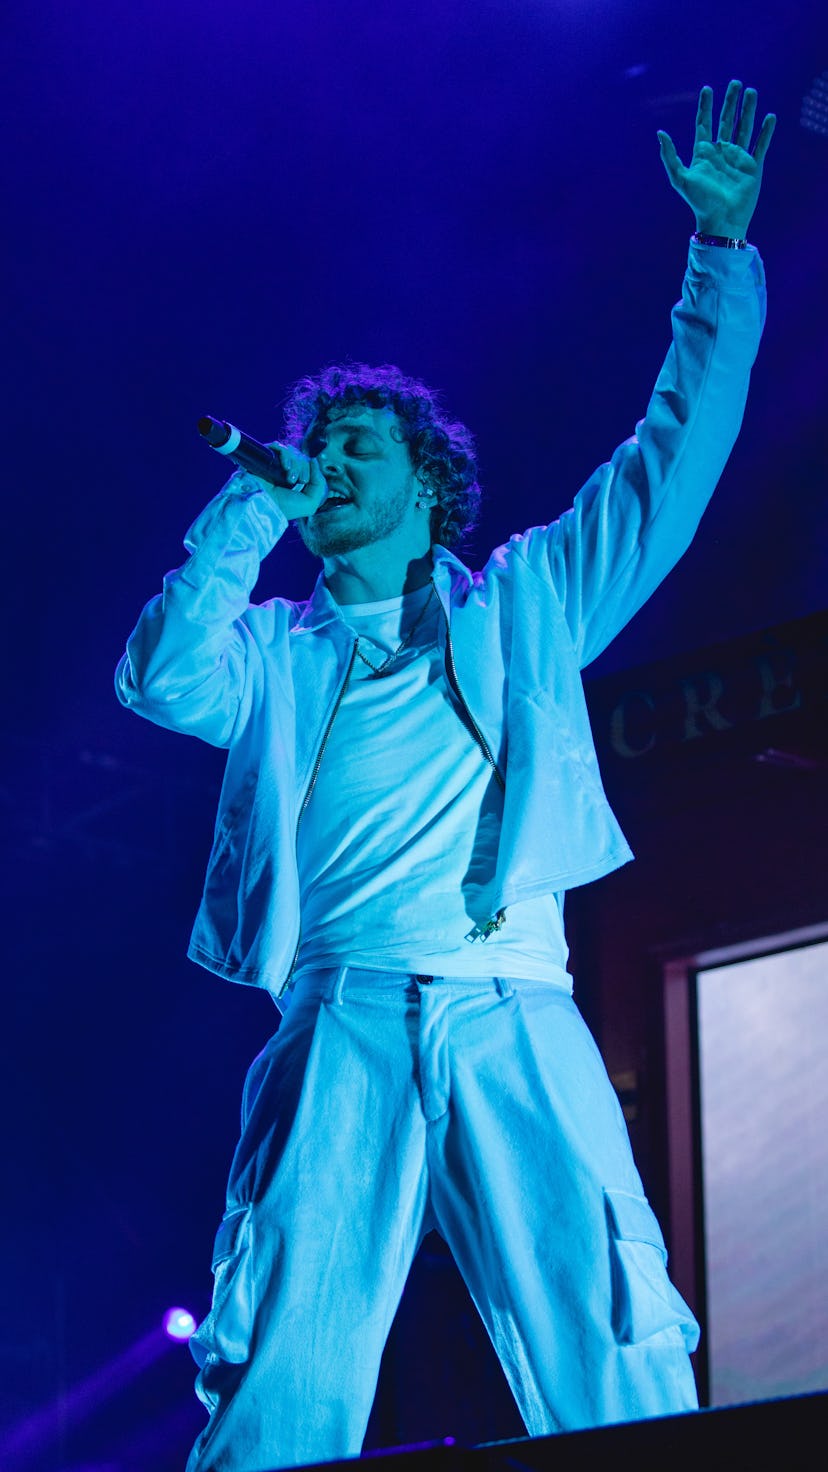 AUSTIN, TEXAS - OCTOBER 02: Rapper Jack Harlow performs onstage during weekend one, day two of Austi...